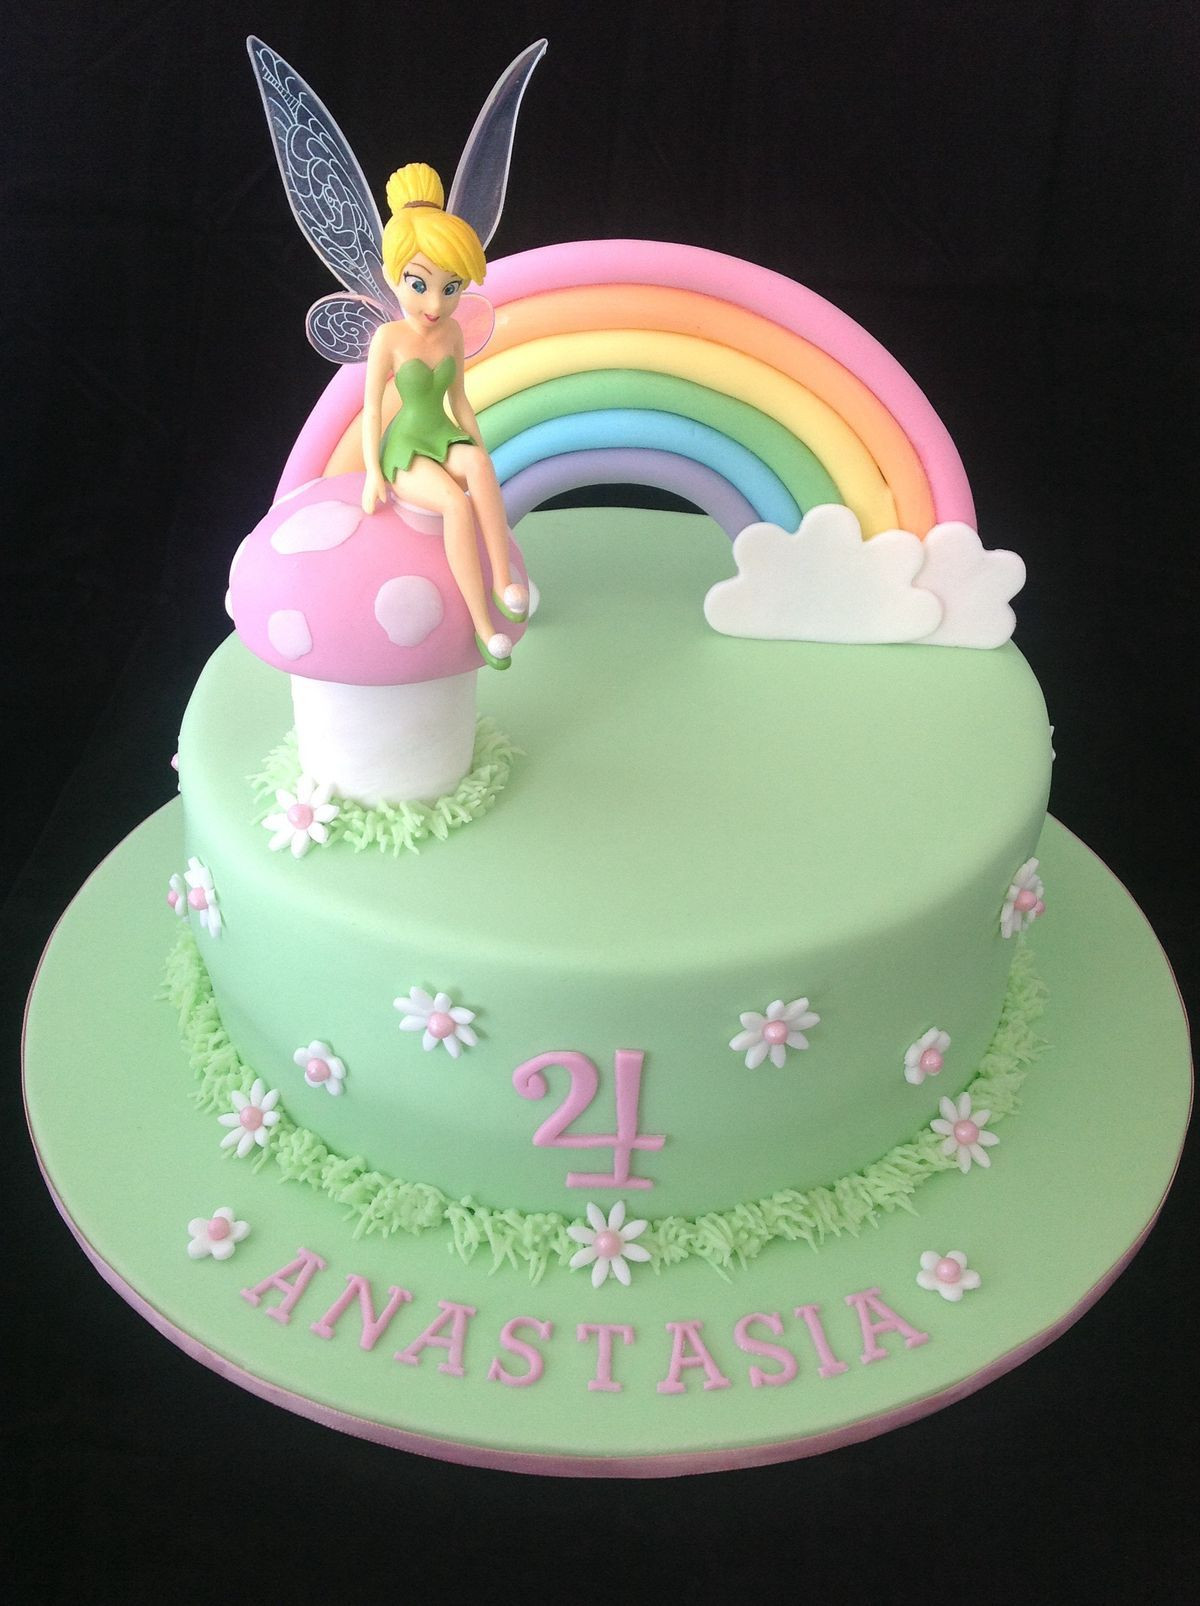 Tinkerbell Birthday Cakes
 Pin by Linda Amidon on Cakes